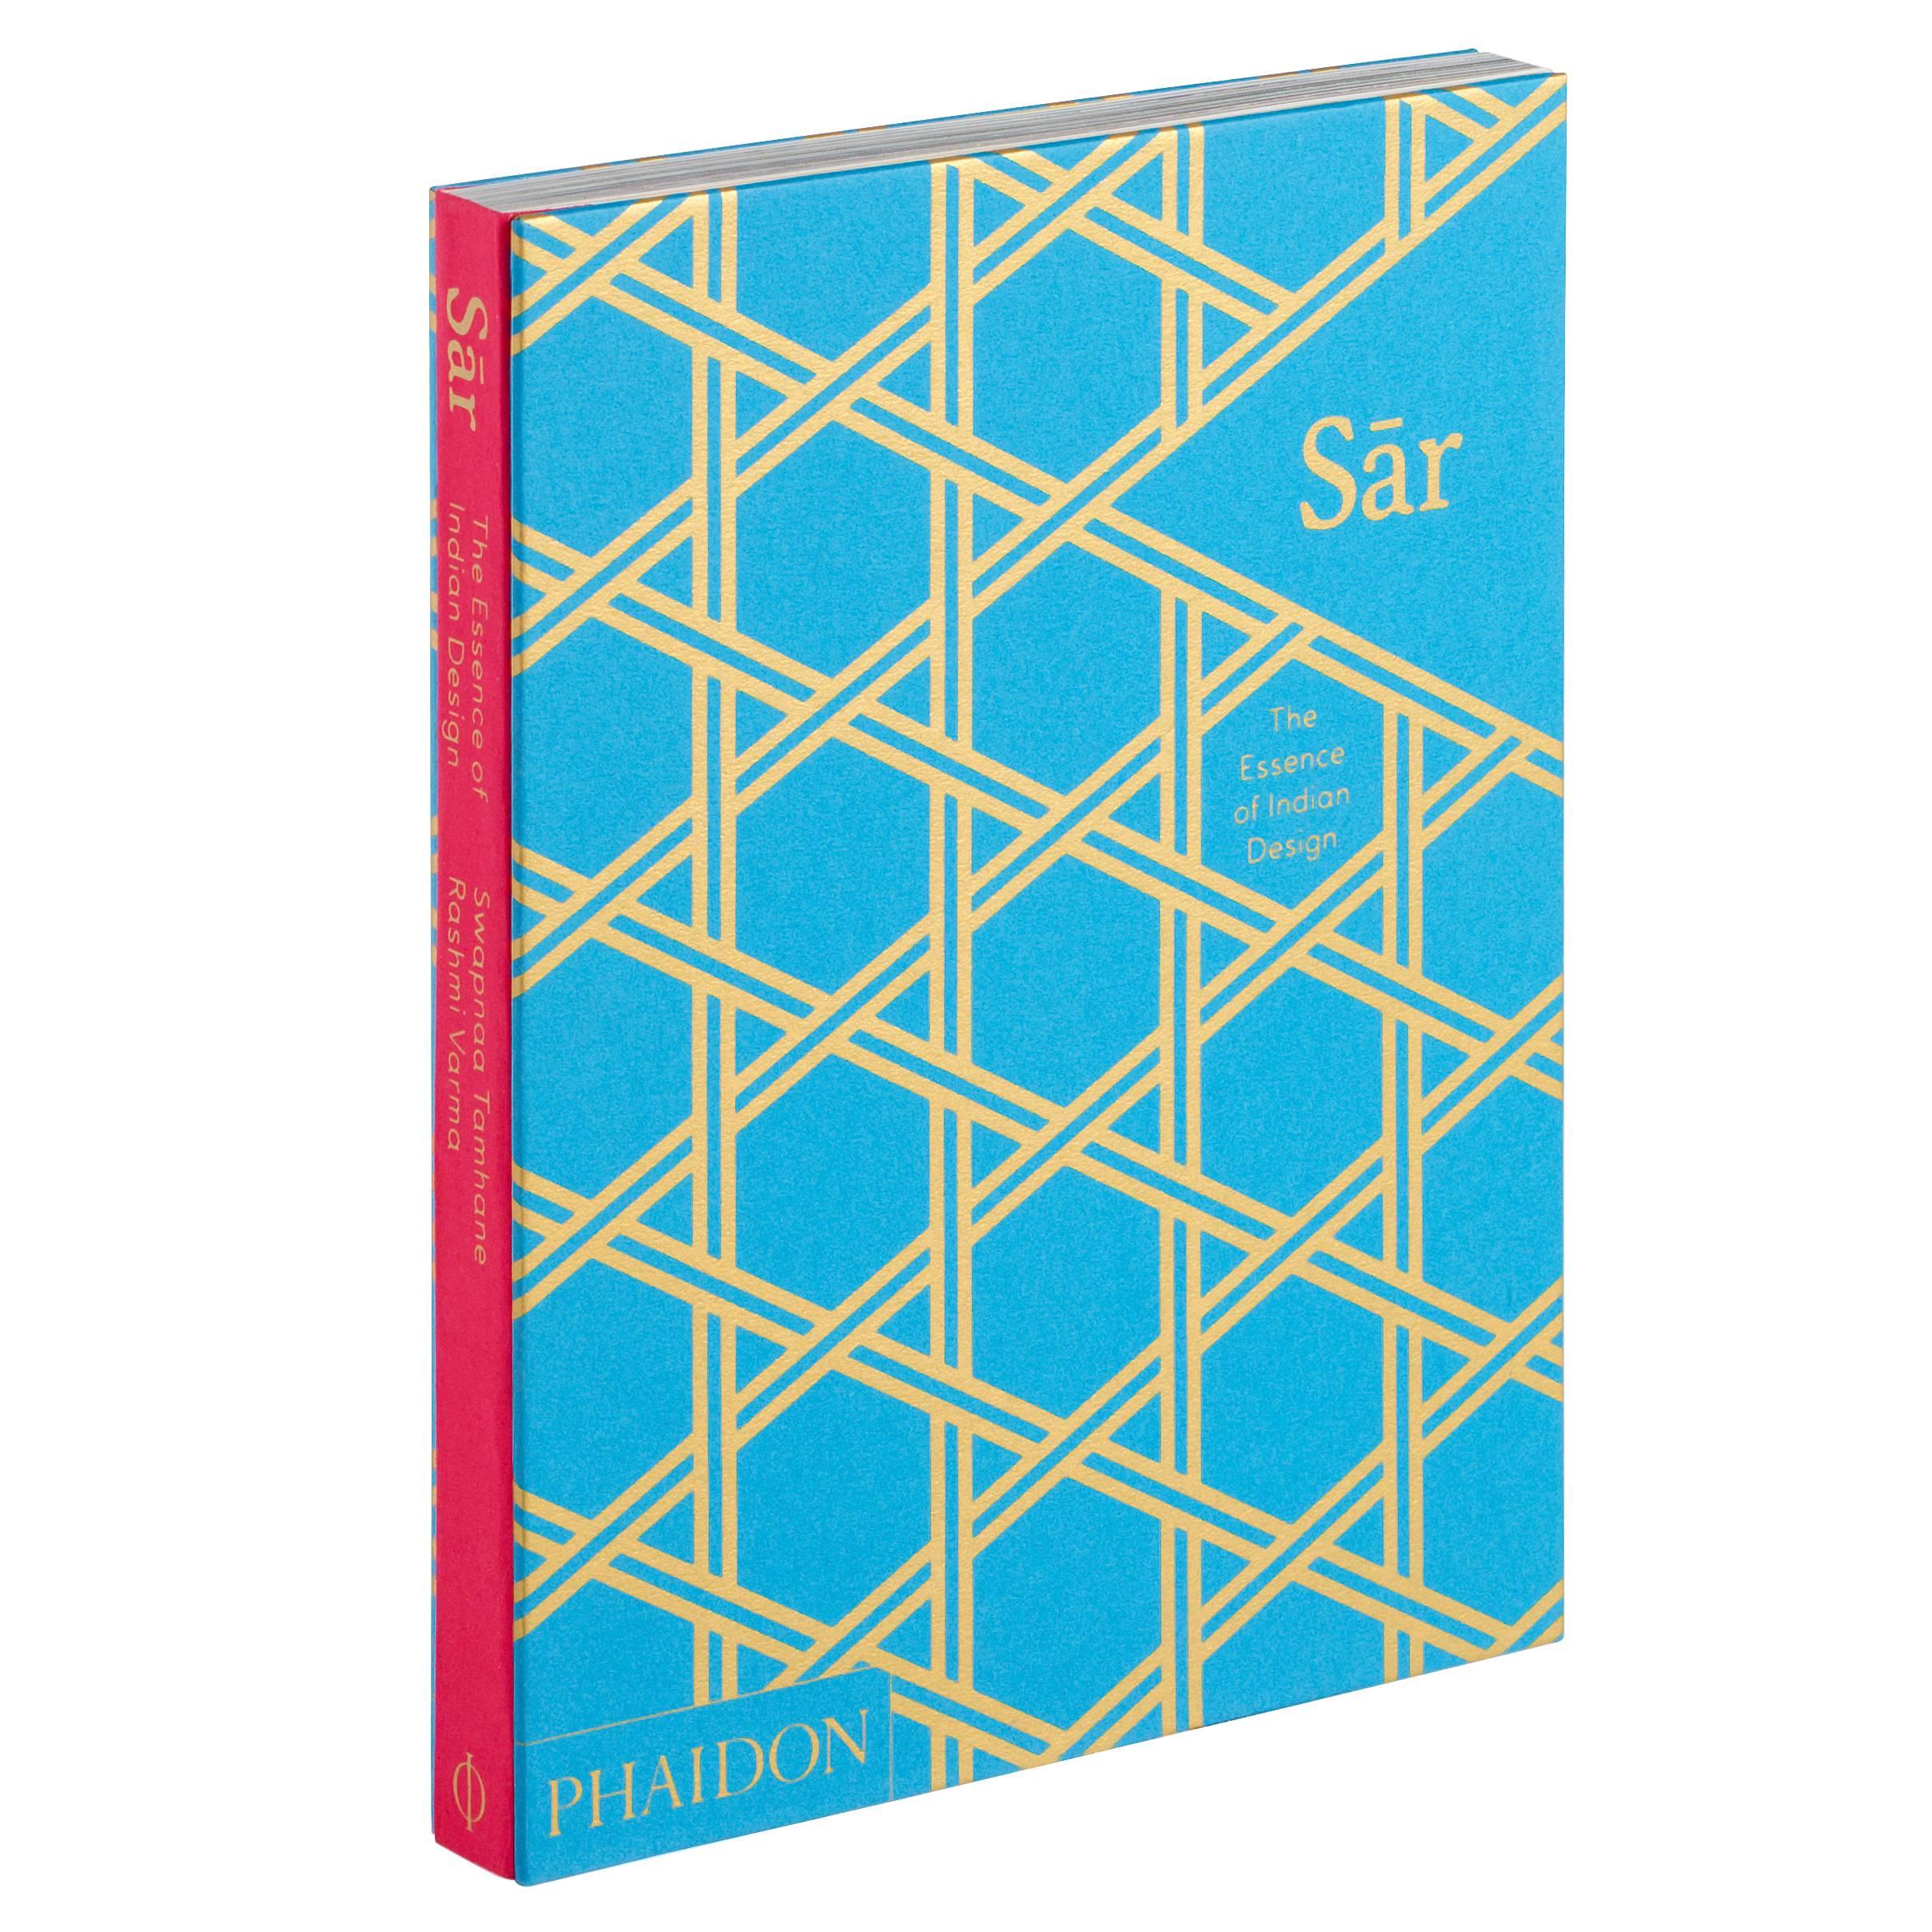 Sar The Essence of Indian Design Book For Sale